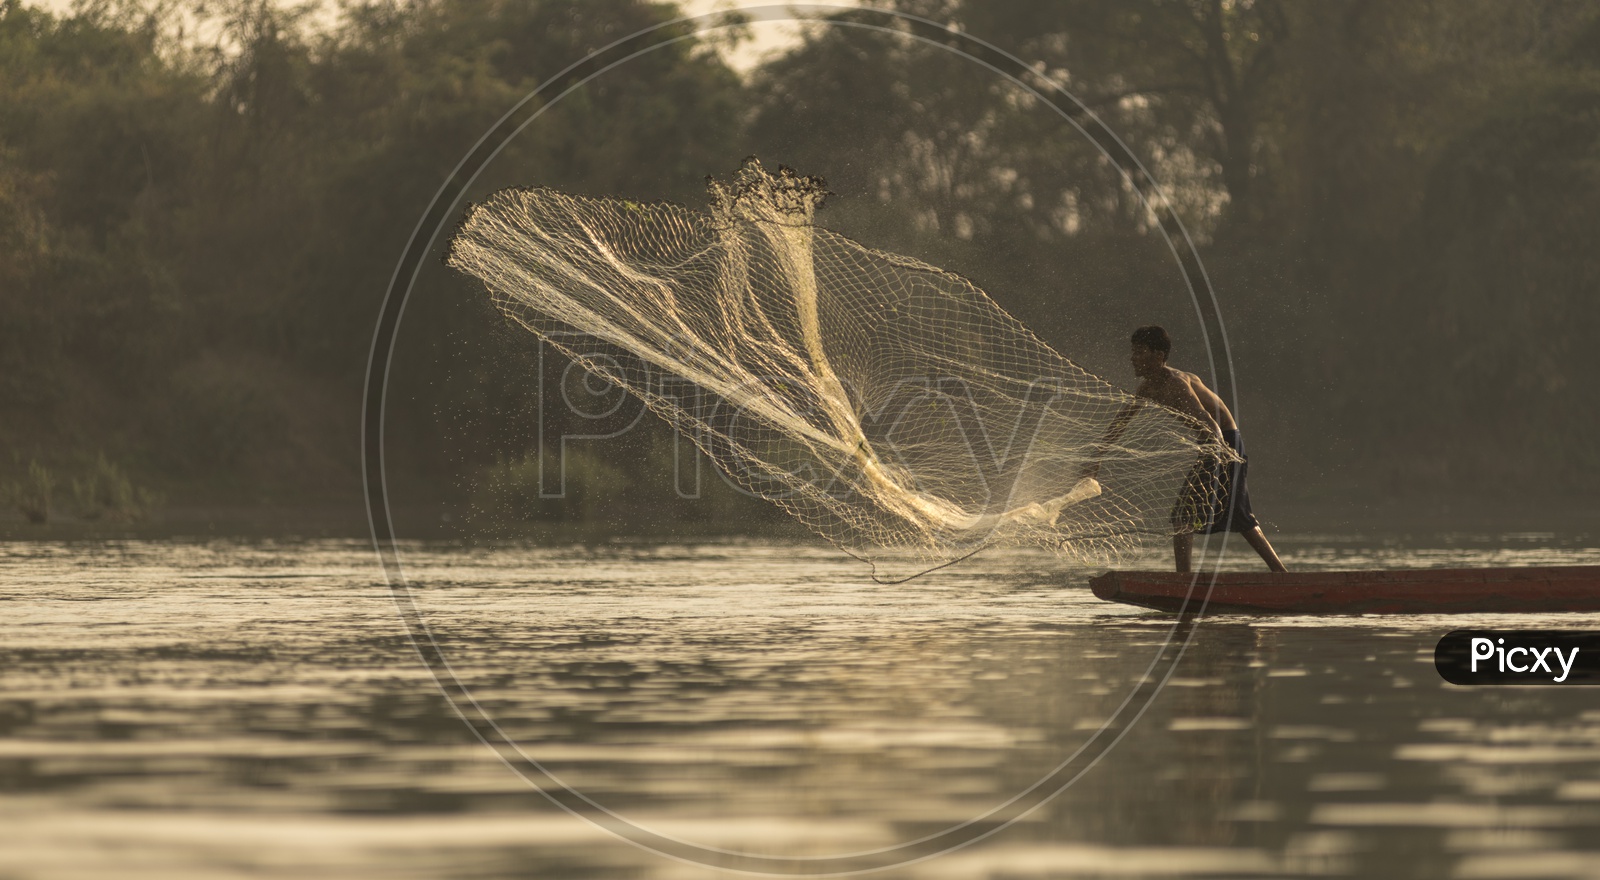 Fishermen along the banks of the Mekong river, Thailand and Laos.